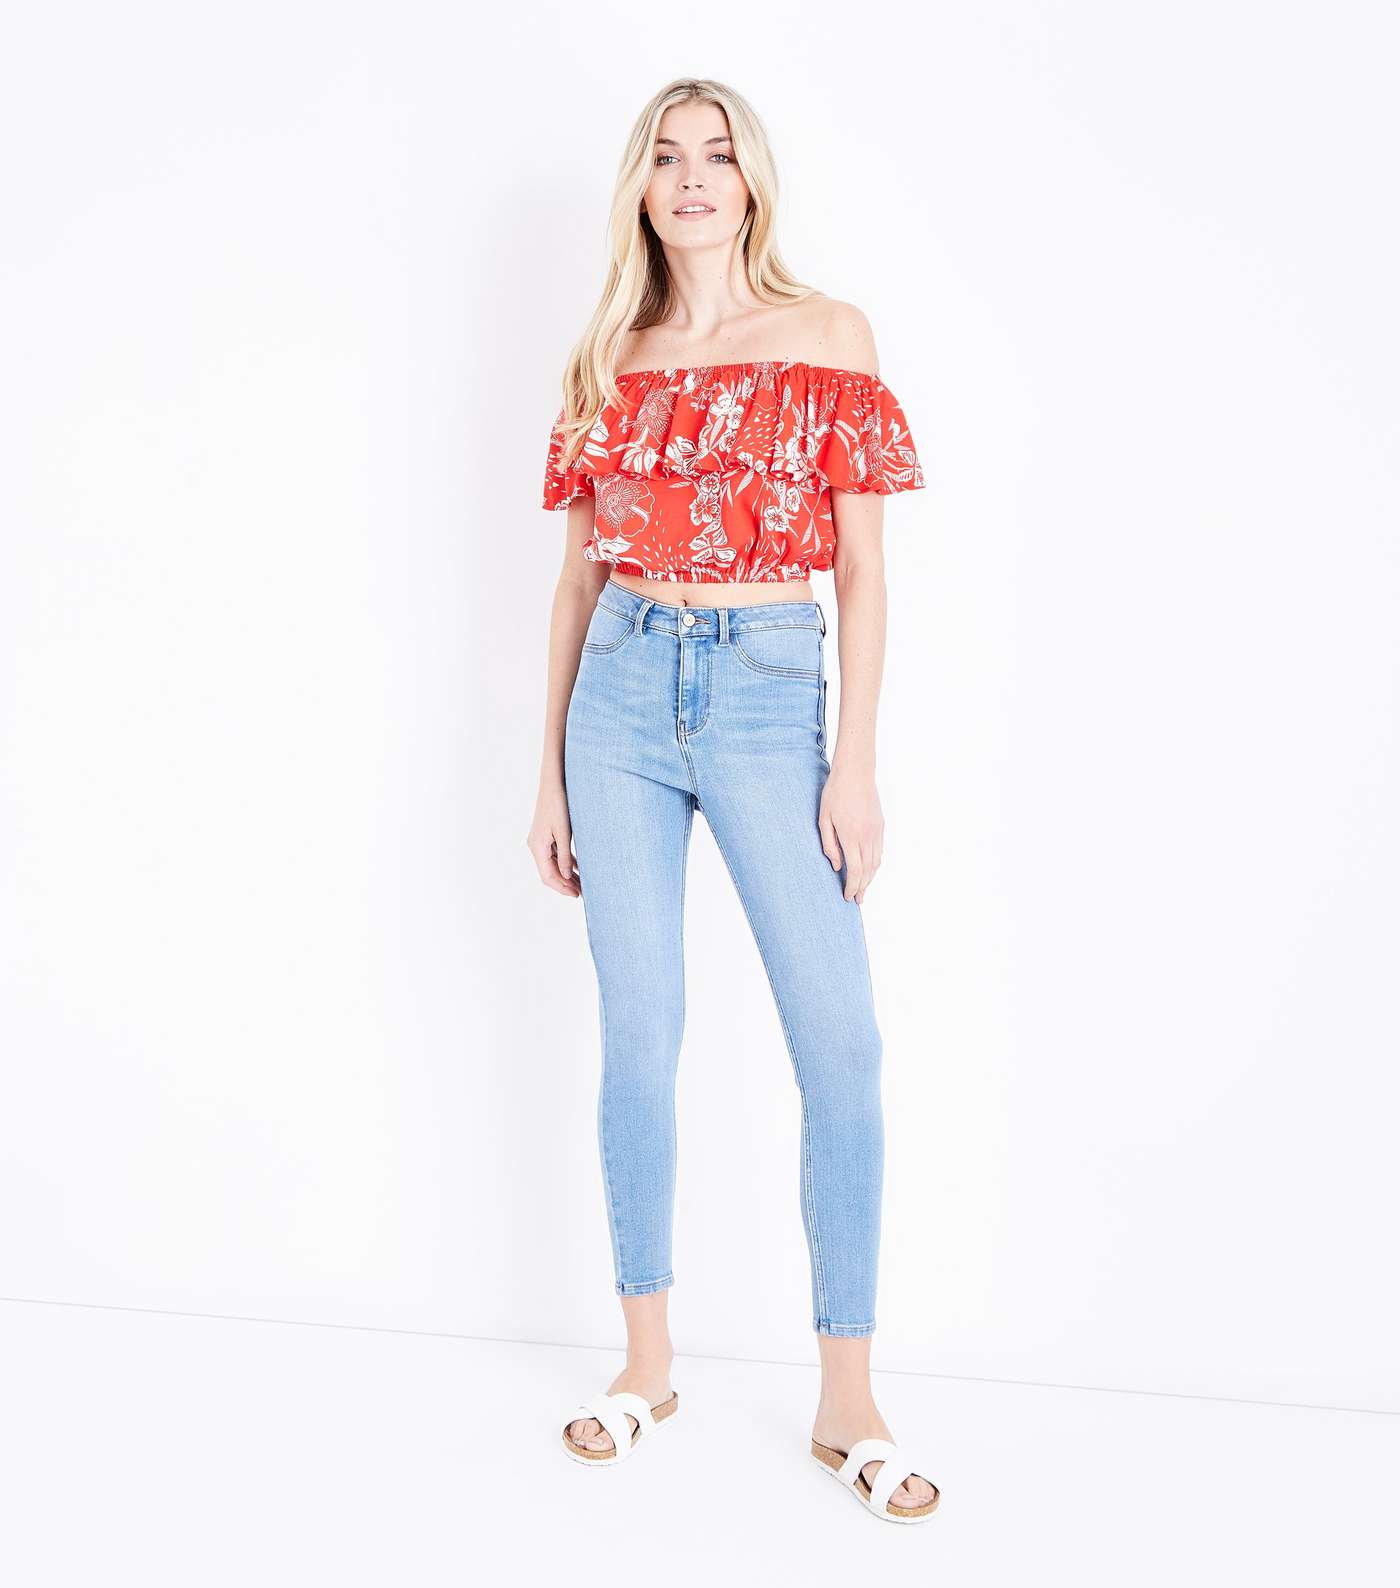 Red Floral Frill Bardot Crop Top Image 2